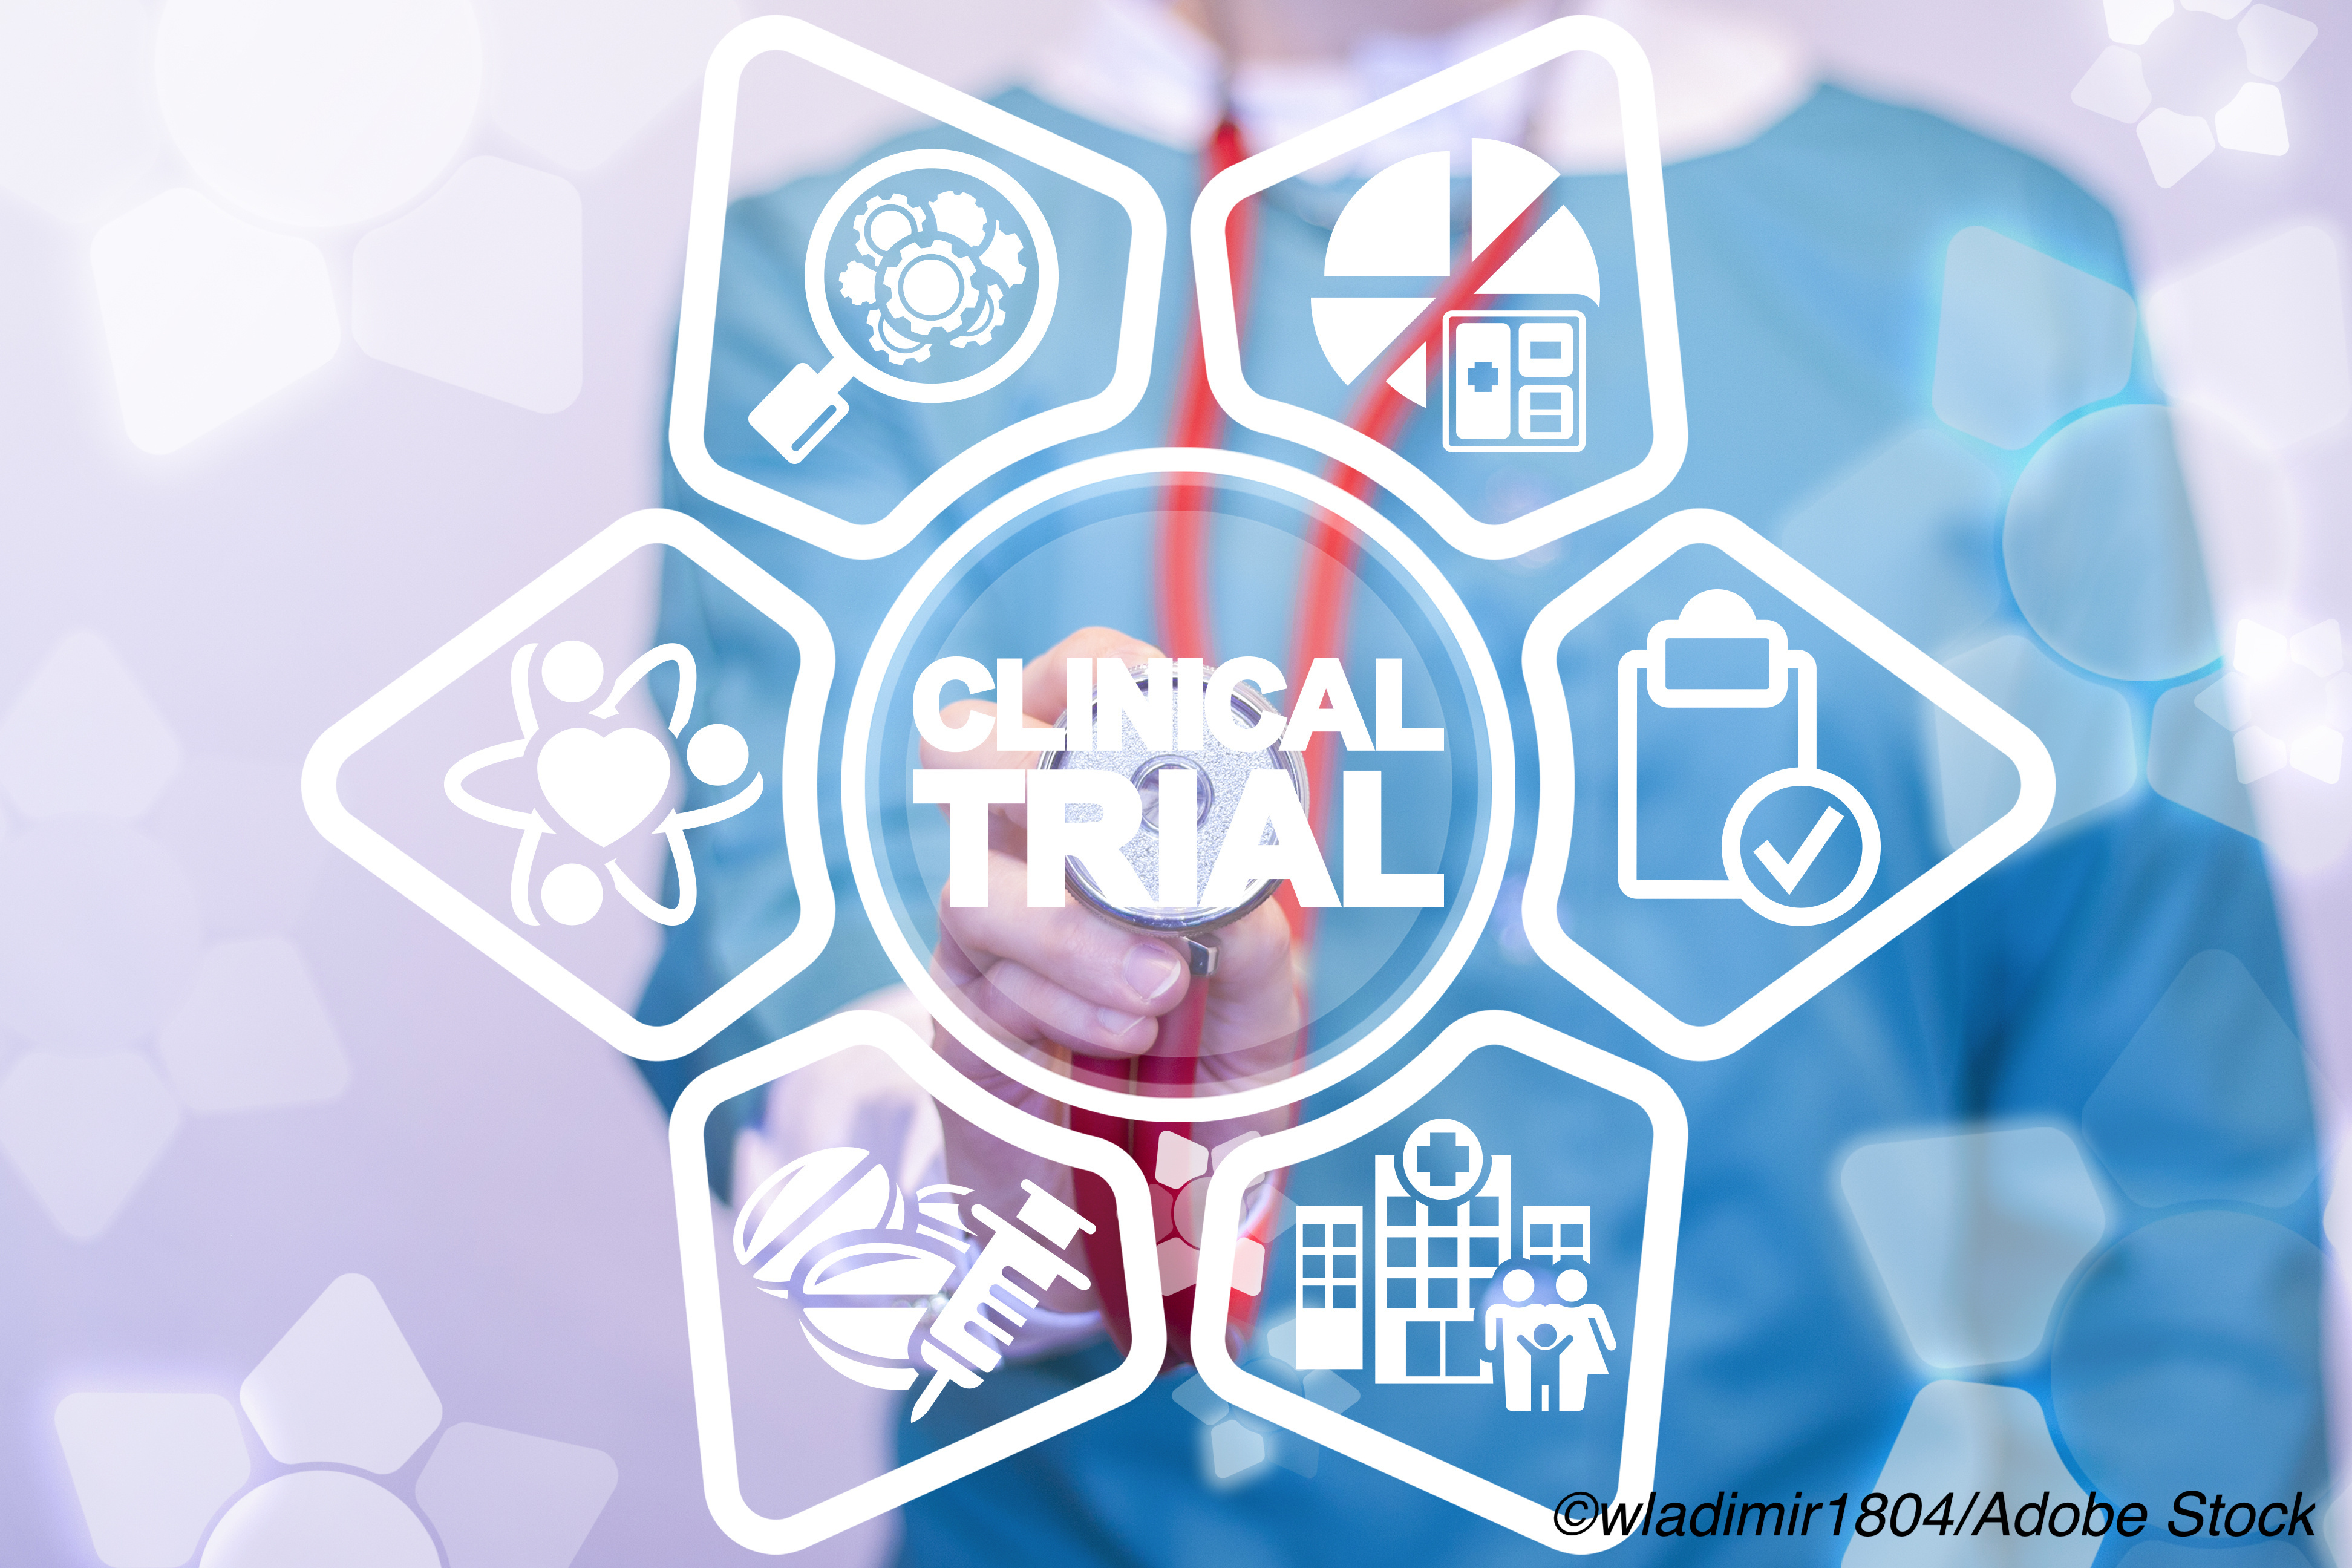 Cancer Research: Observational Studies Still No Substitute for Randomized Clinical Trials